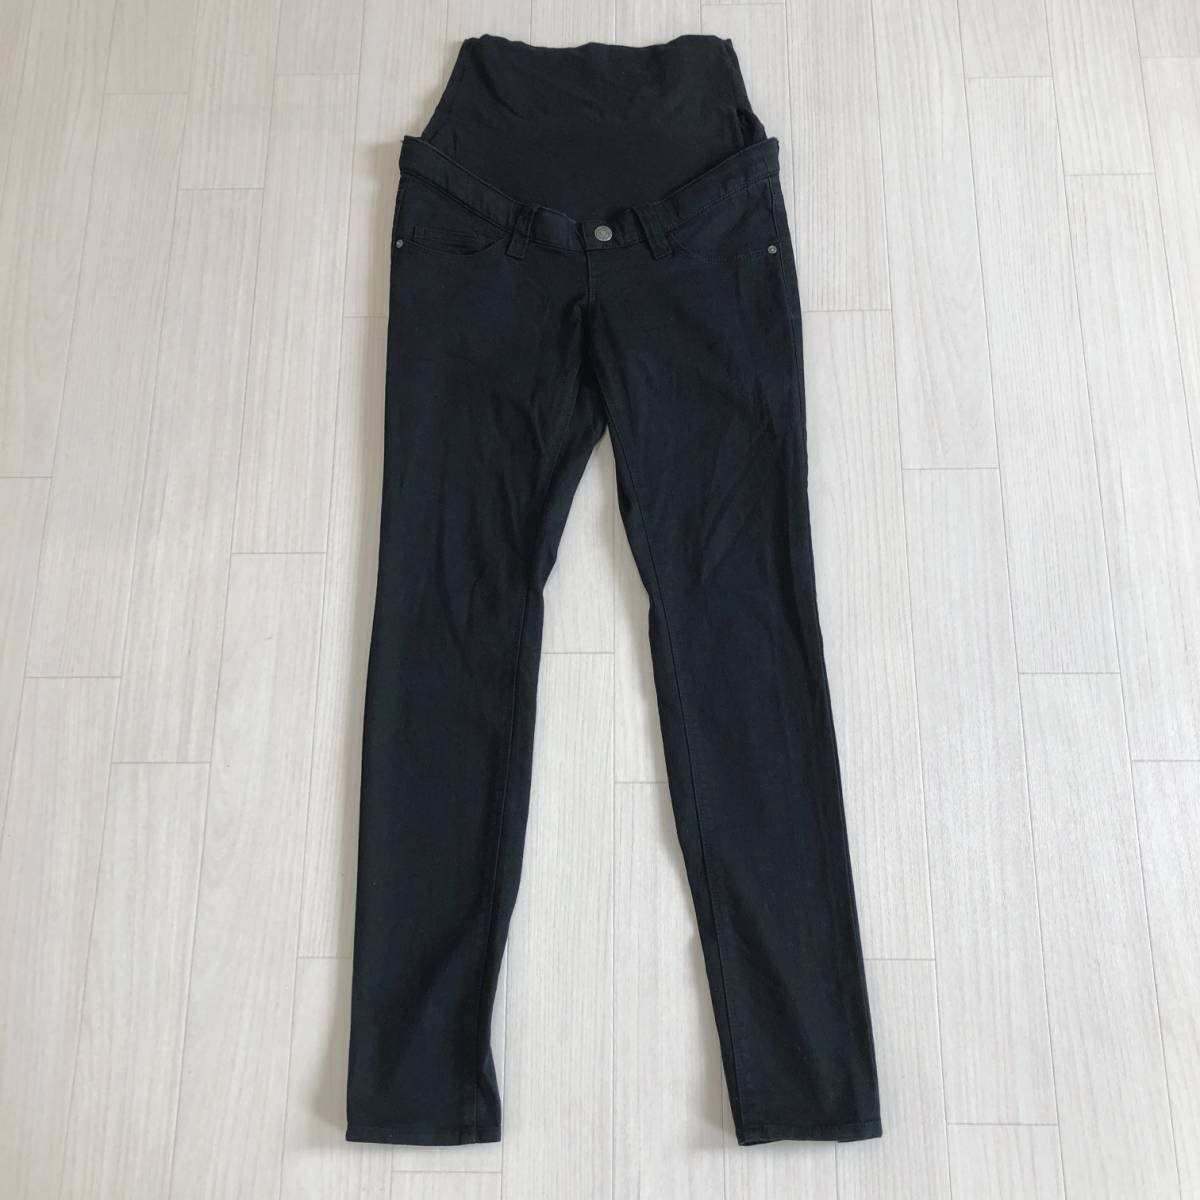 AS1154 lady's bottoms skinny pants maternity long height S size black black plain cotton cotton casual all-purpose all season 